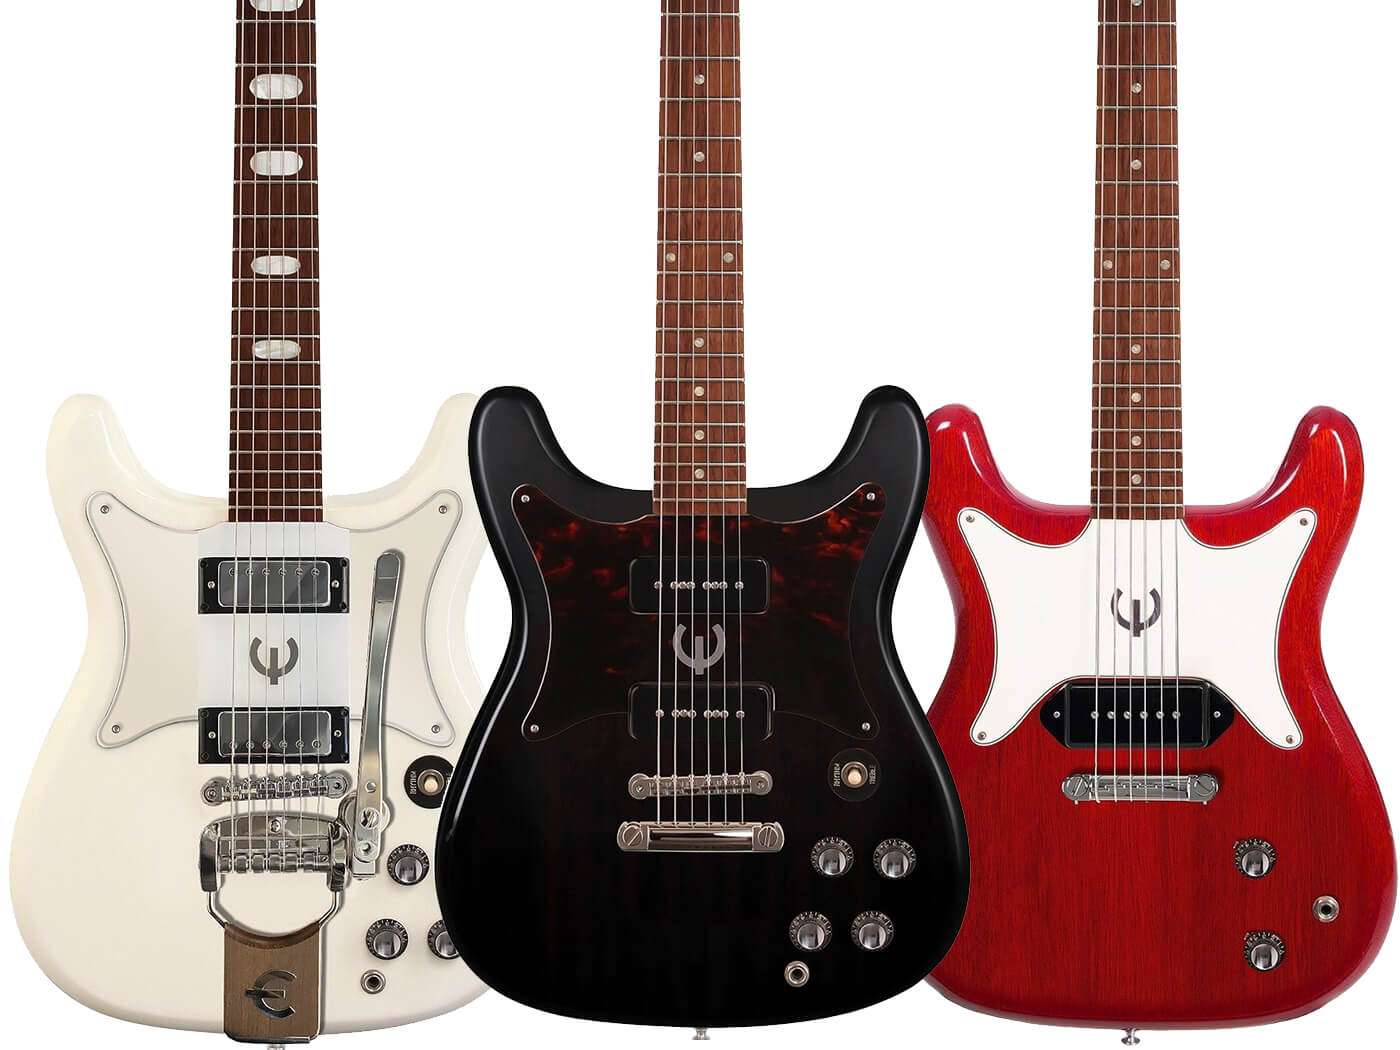 Epiphone brings back the Crestwood, Wilshire and Coronet guitars